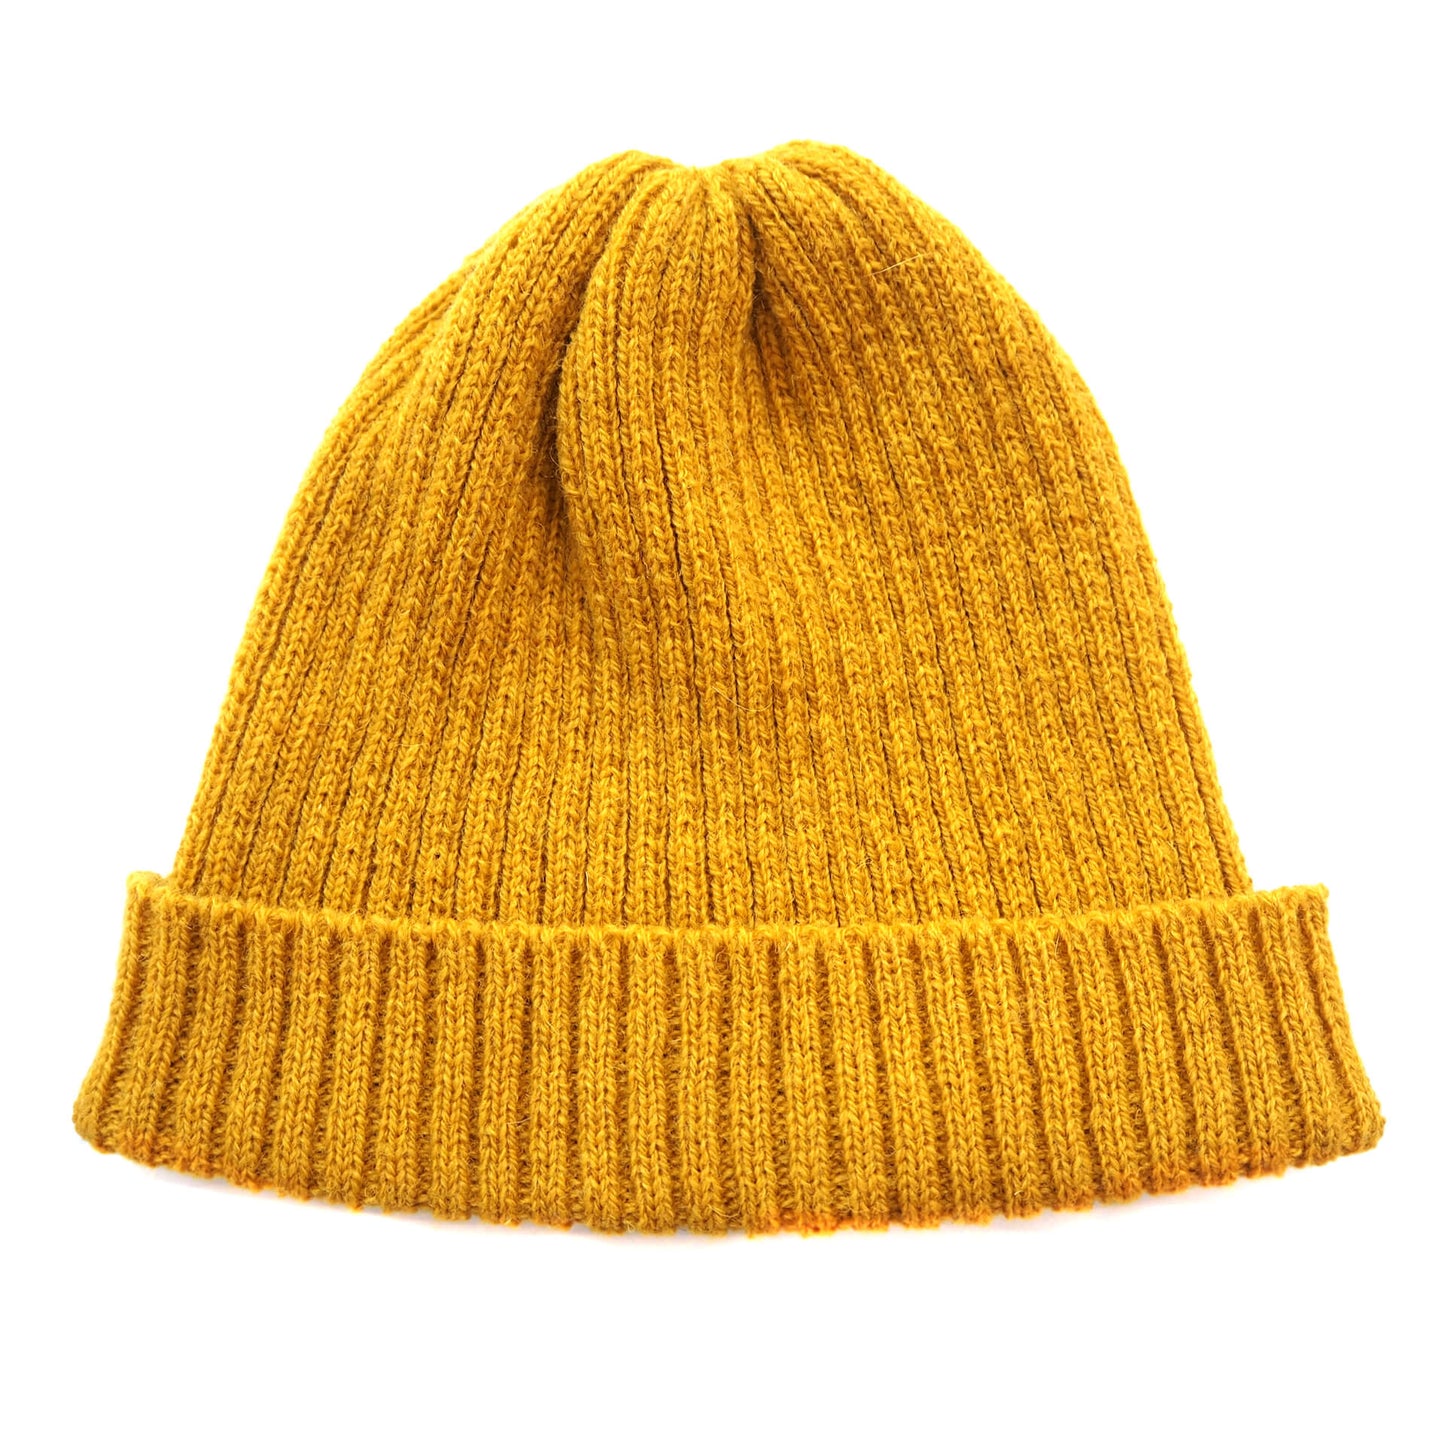 A yellow ribbed beanie with a folded brim by K.Moods. It is on a white background.